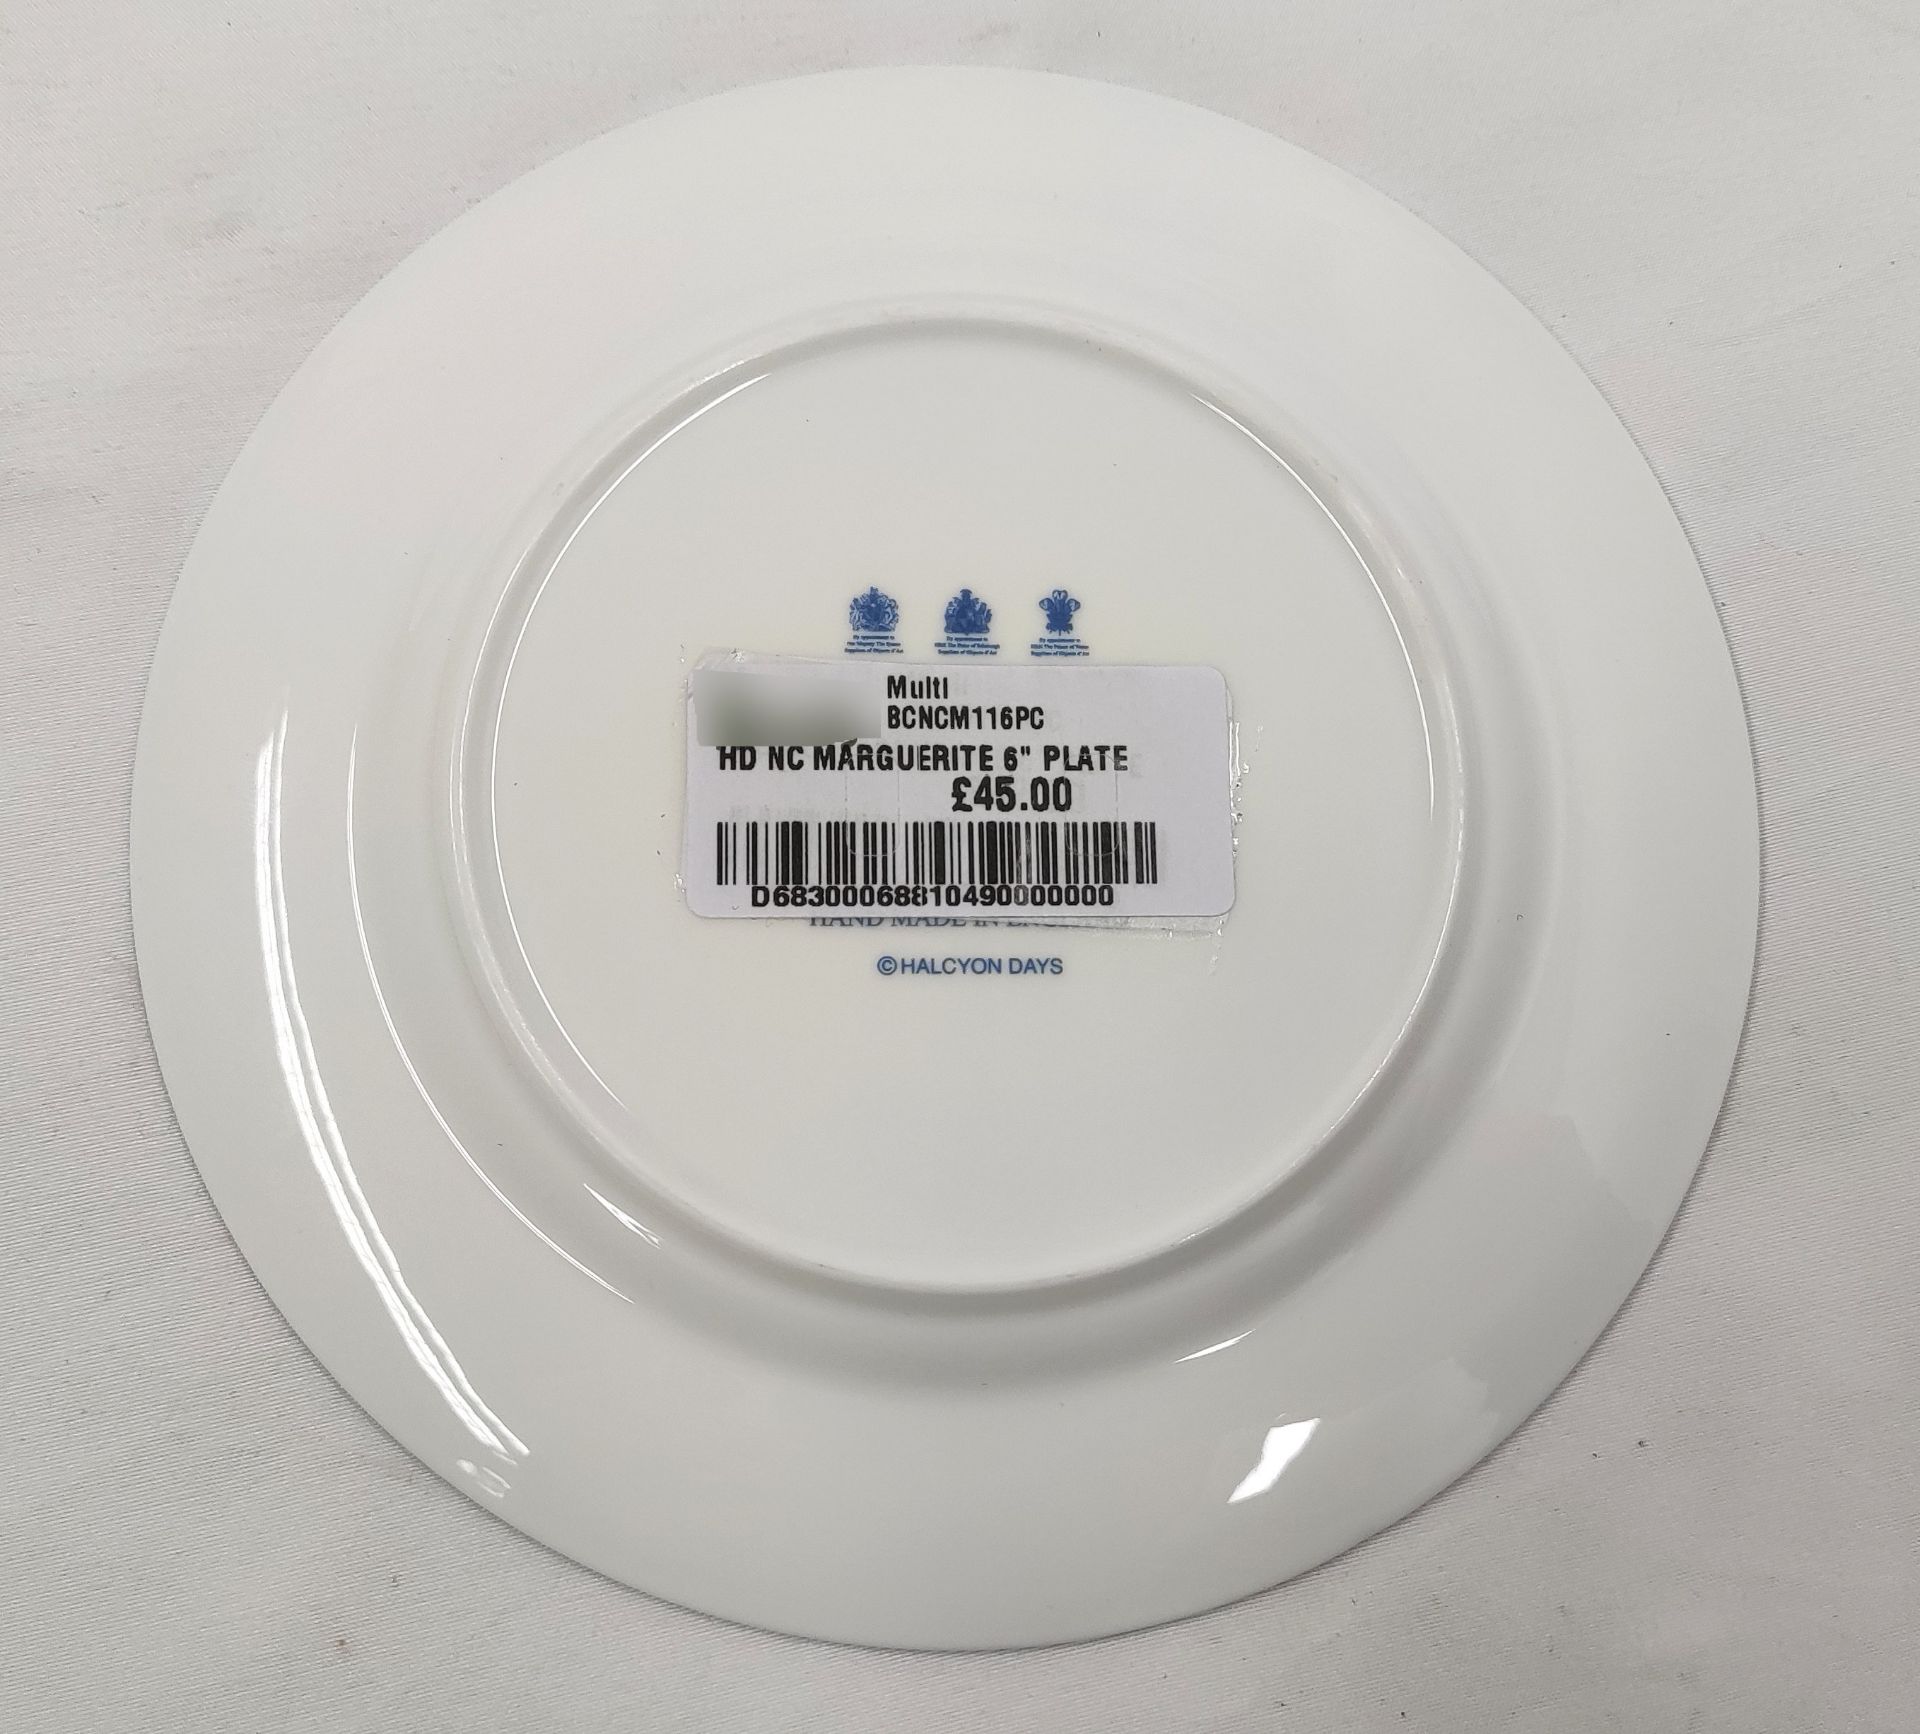 1 x HALCYON DAYS Nina Campbell Marguerite 6" Side Plate - New/Boxed - Original RRP £59.00 - Image 9 of 10